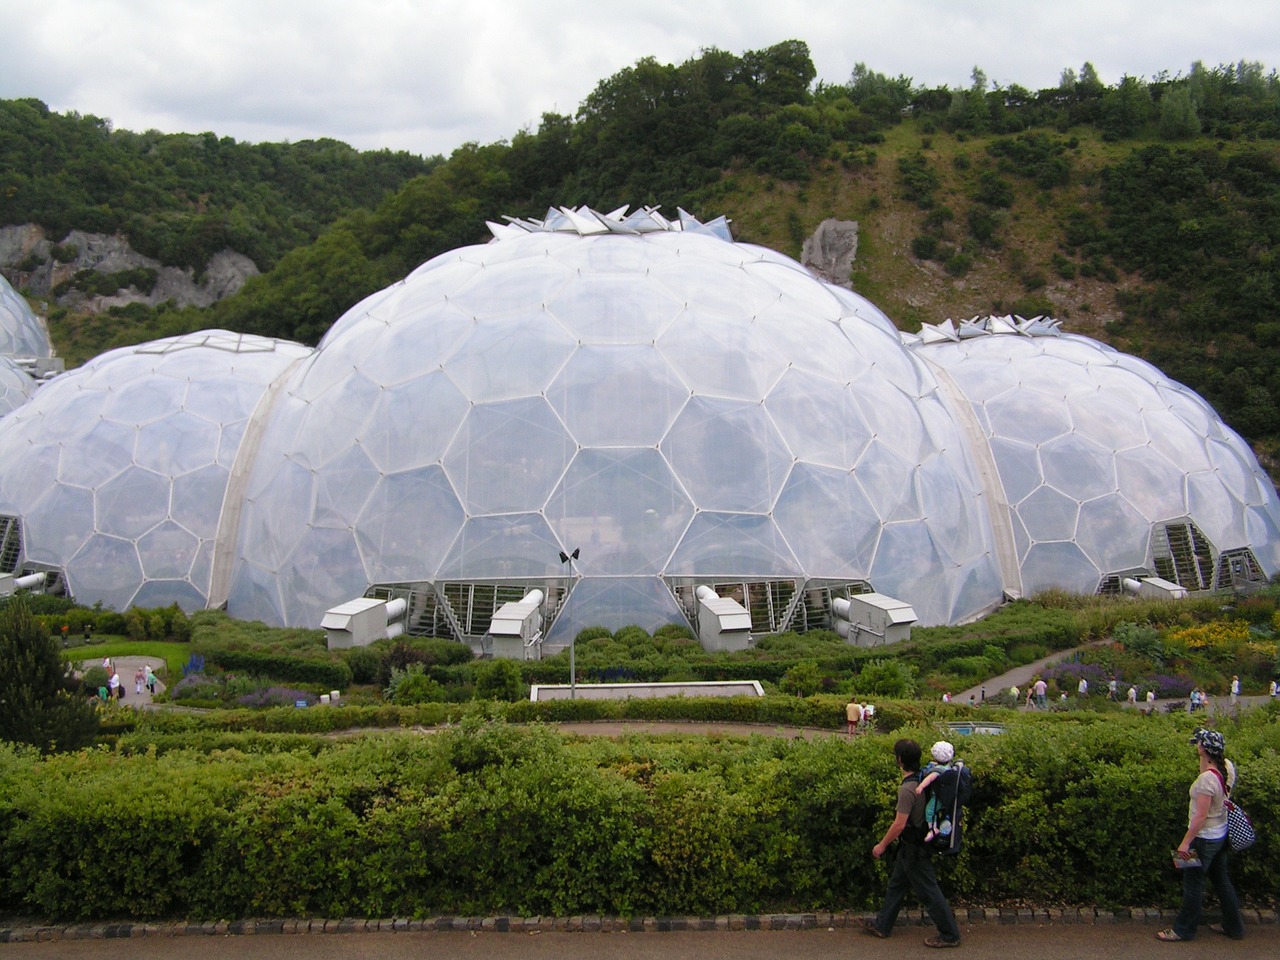 eden project cornwall england free photo